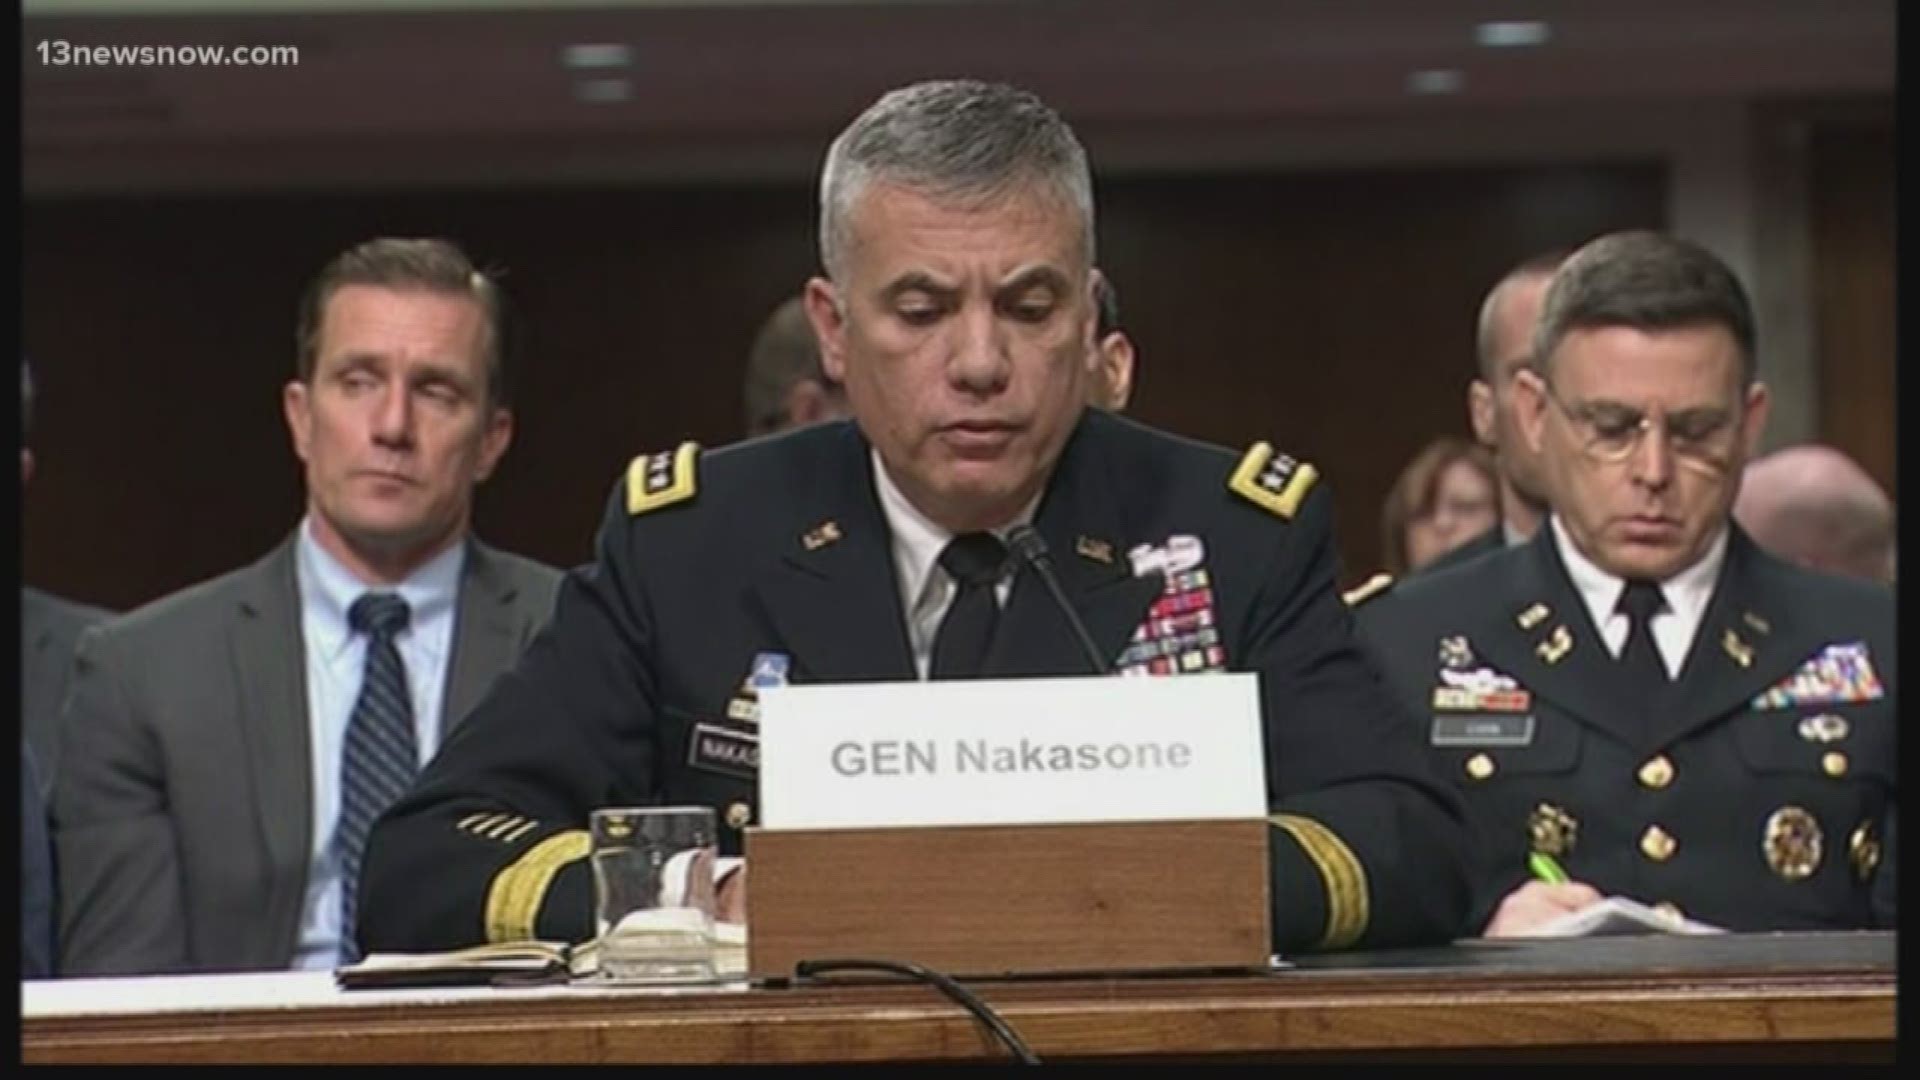 General Nakasone acknowledges that American people should be concerned.